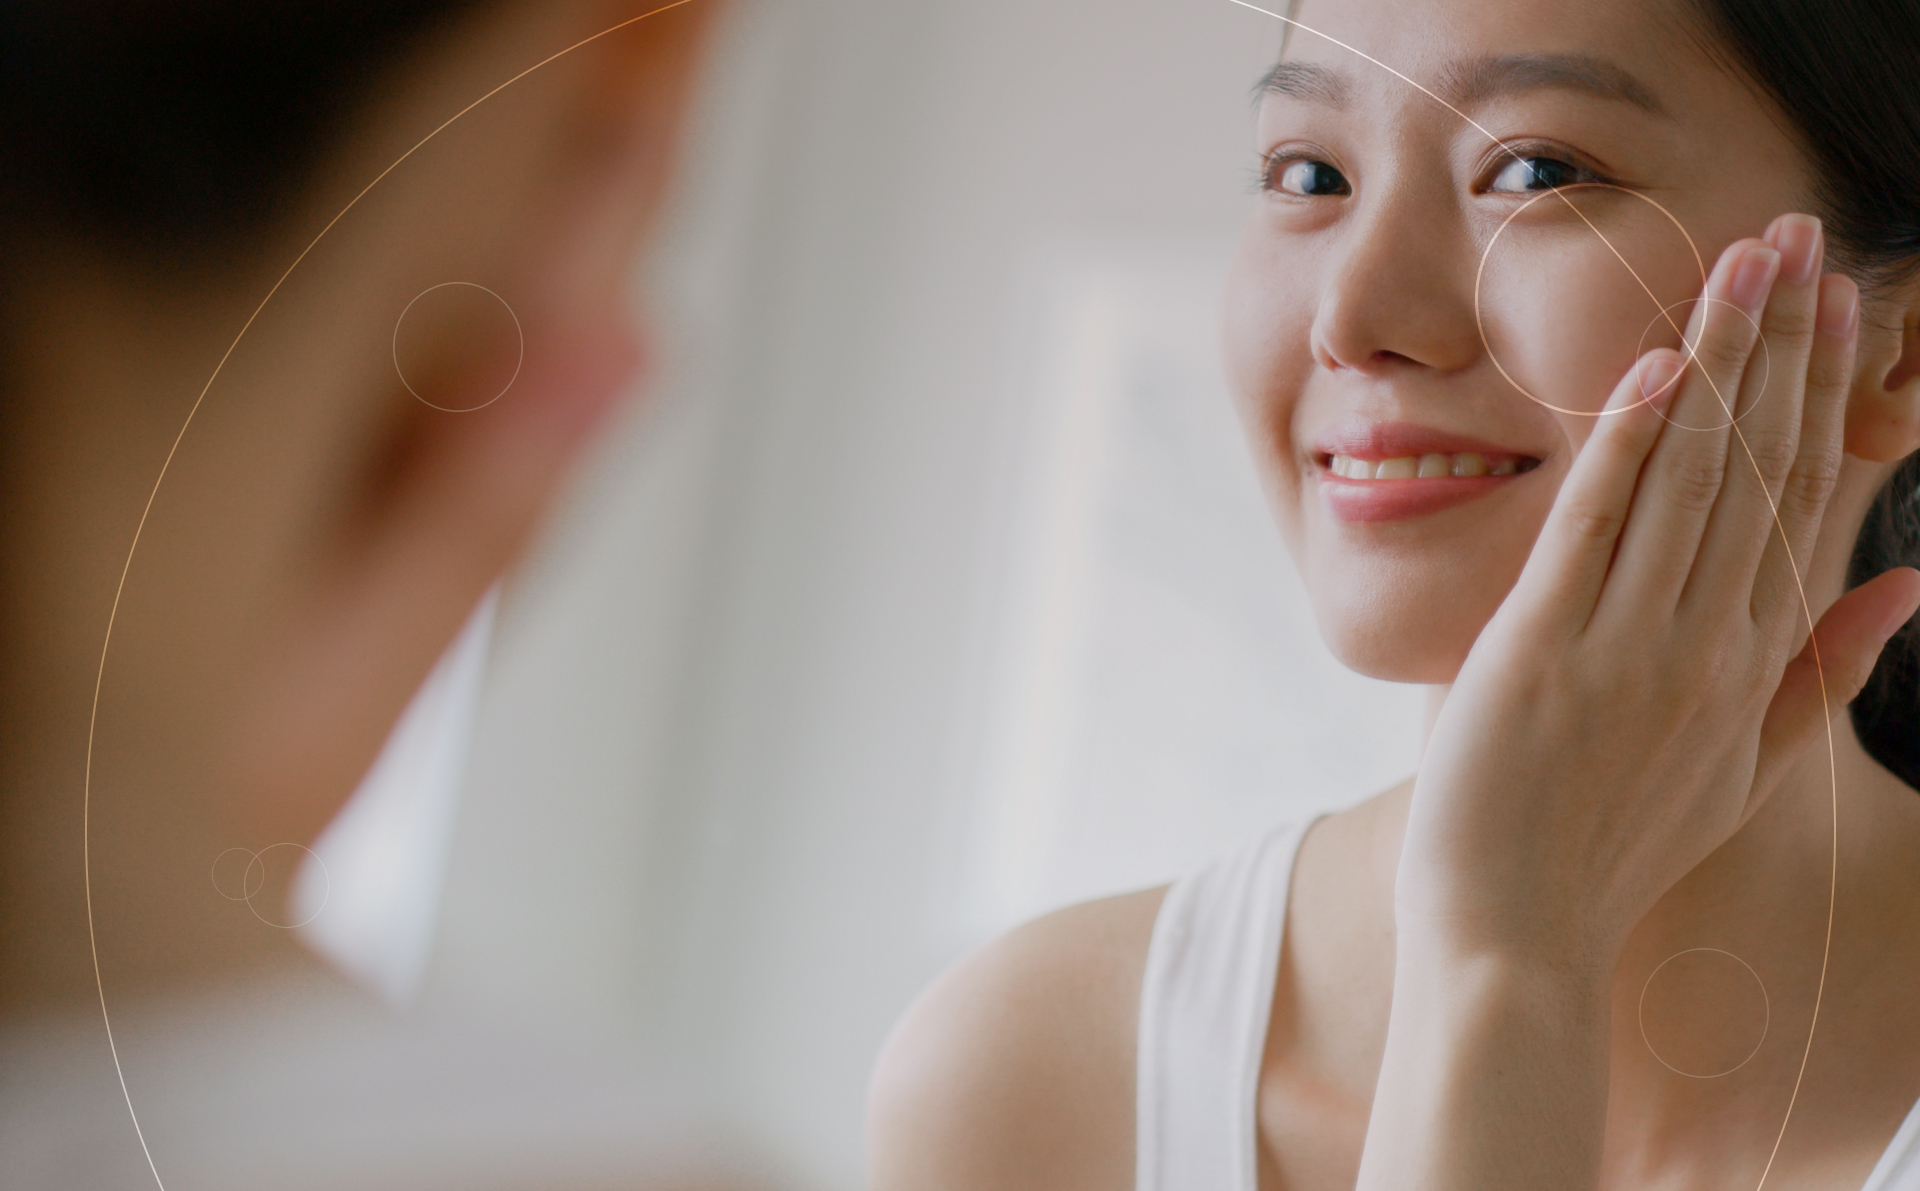 Smiling Woman taking care of her face in front of mirror